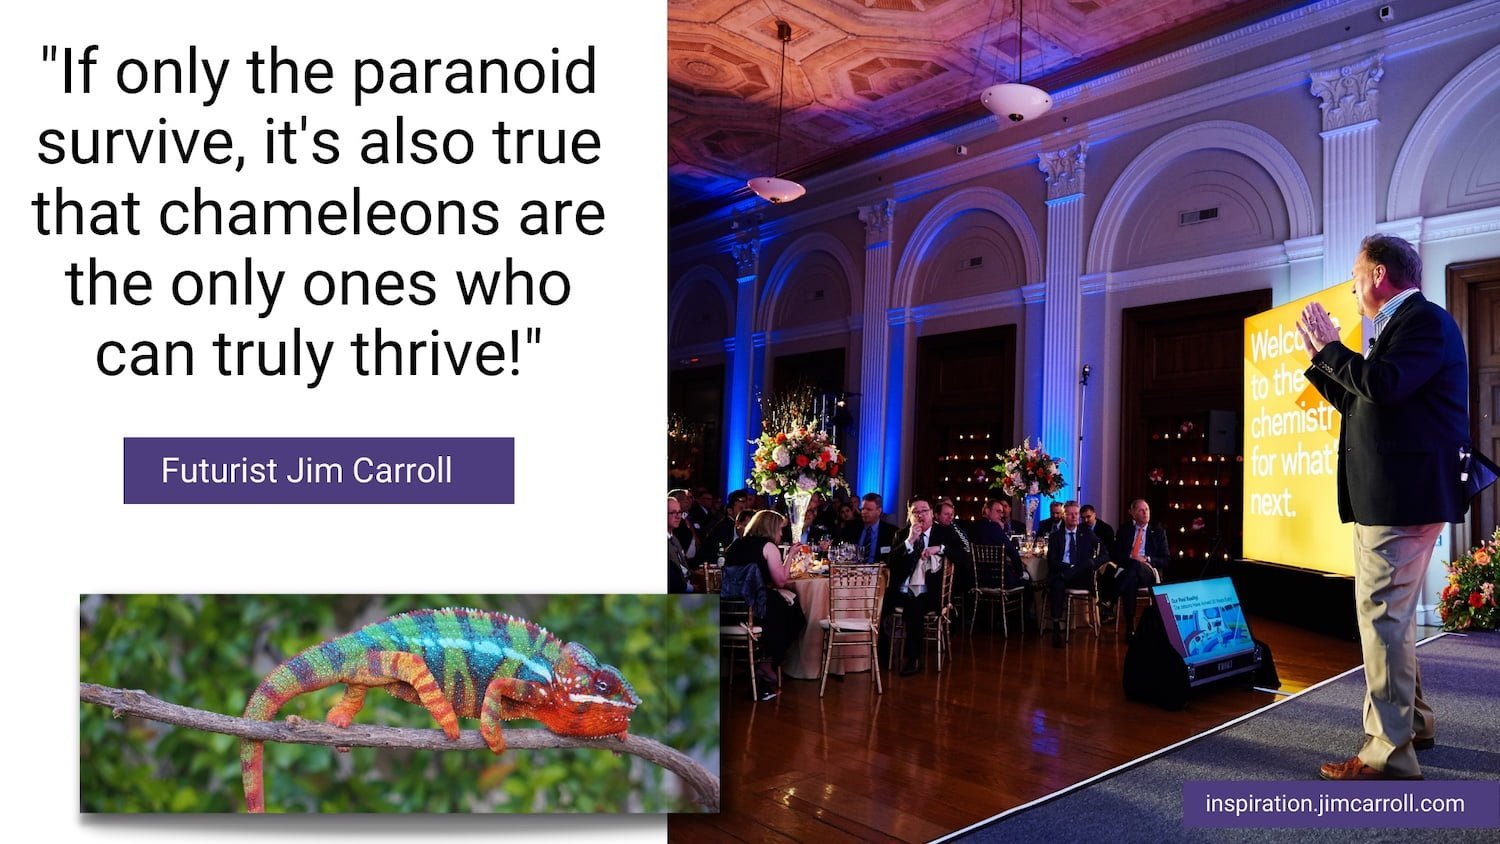 Daily Inspiration: "If only the paranoid survive, it's also true that it's the chameleons who will thrive!"